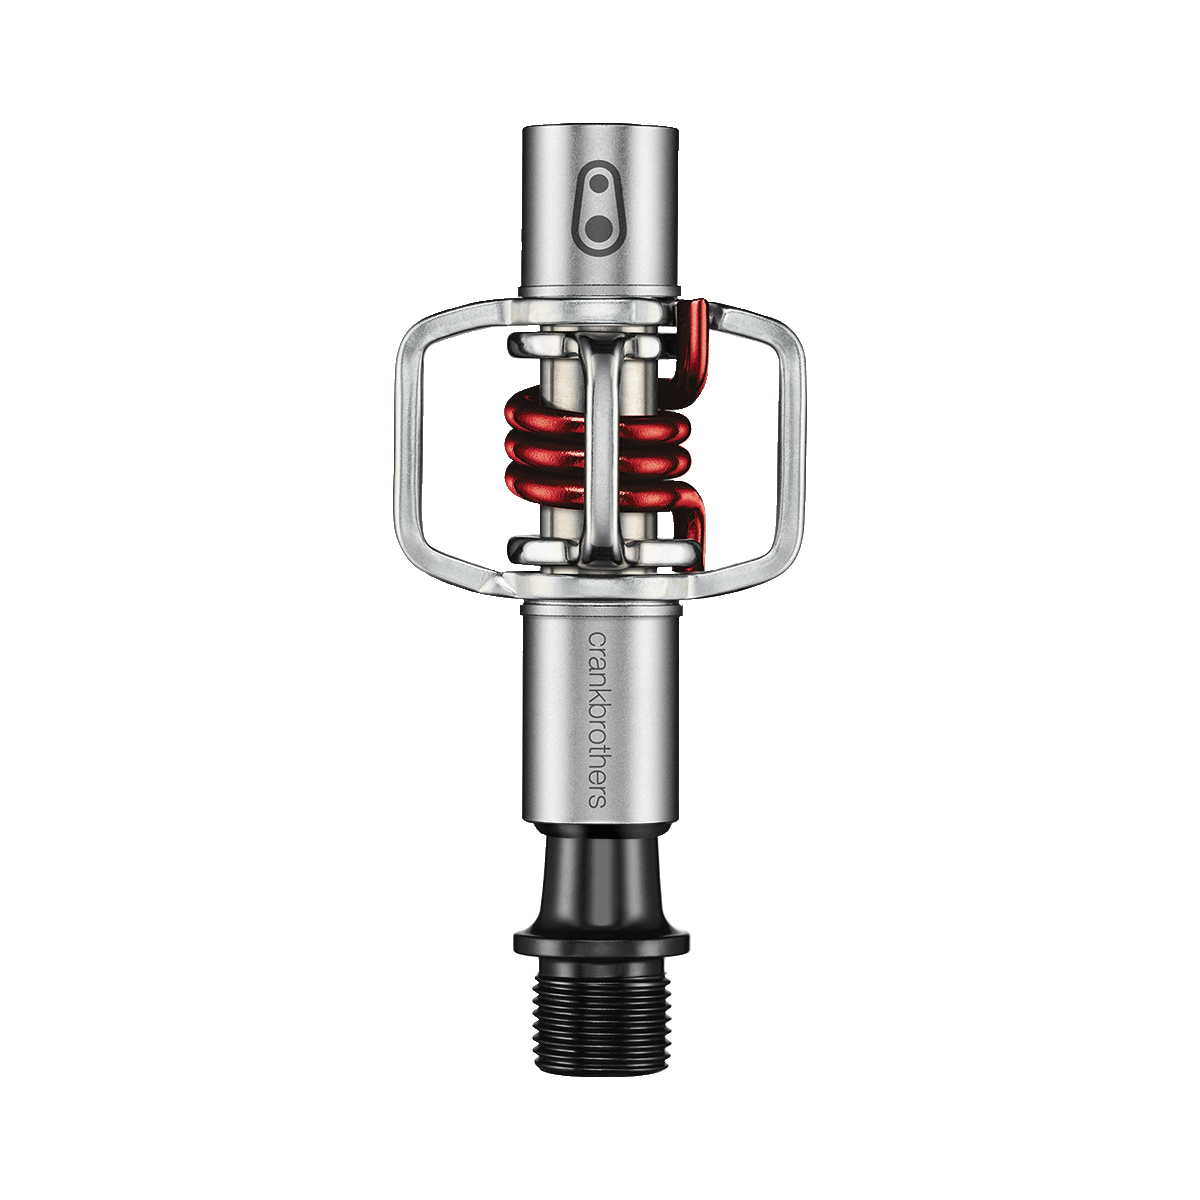 Pedale tip clipless CrankBrothers Eggbeater 1 imagine